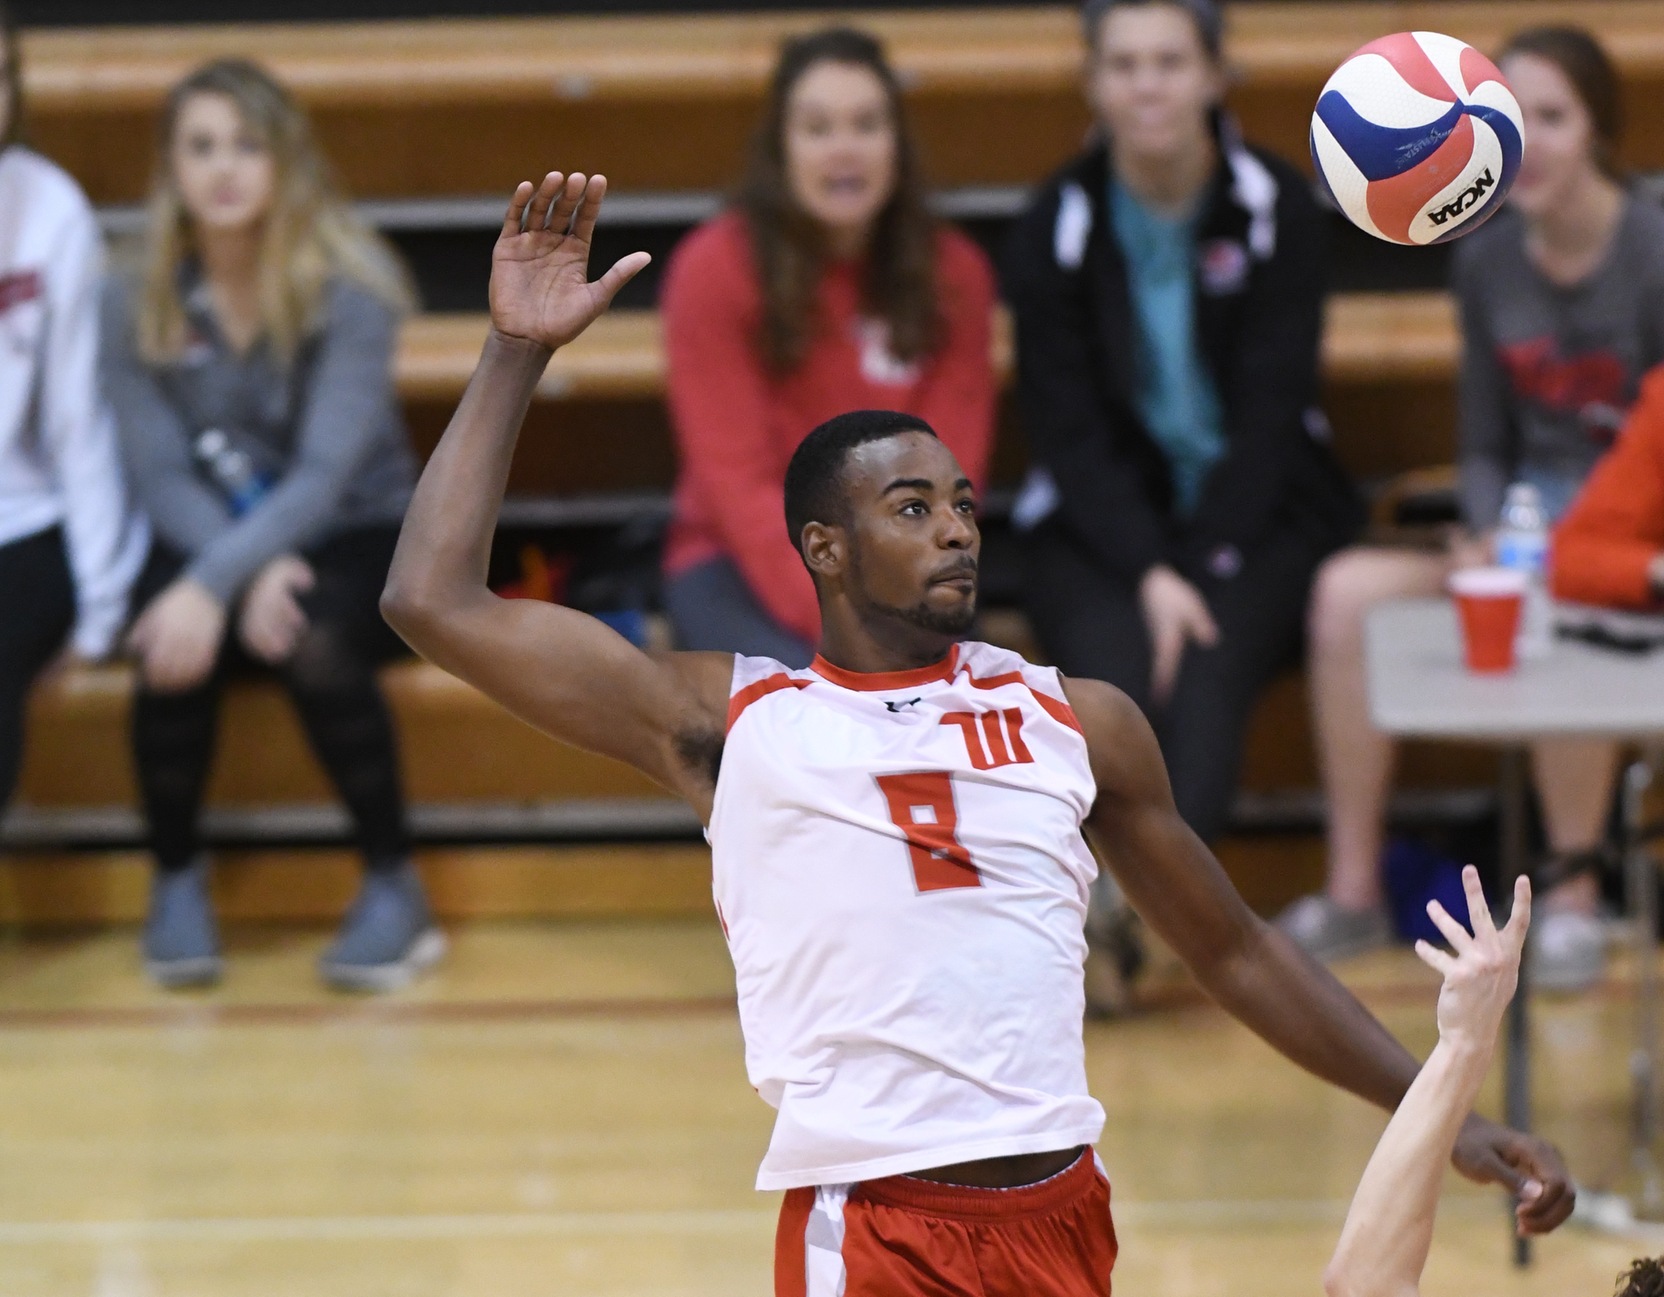 Wittenberg Men's Volleyball Opens Up Against #14 Marymount